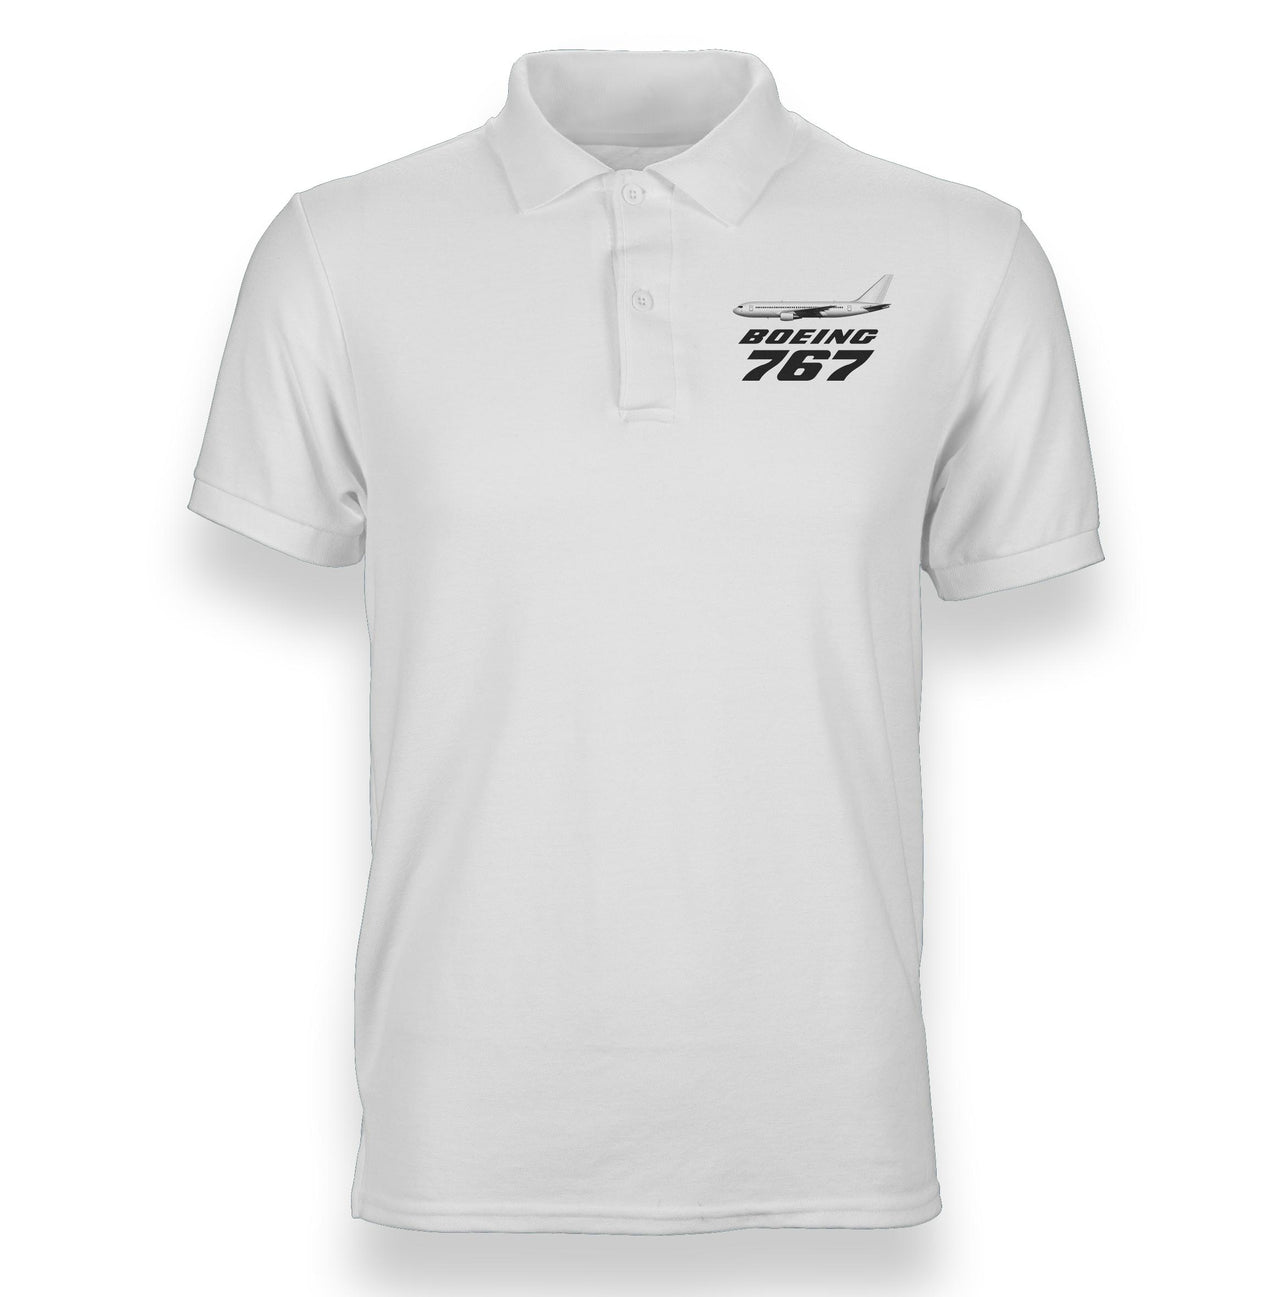 The Boeing 767 Designed Polo T-Shirts